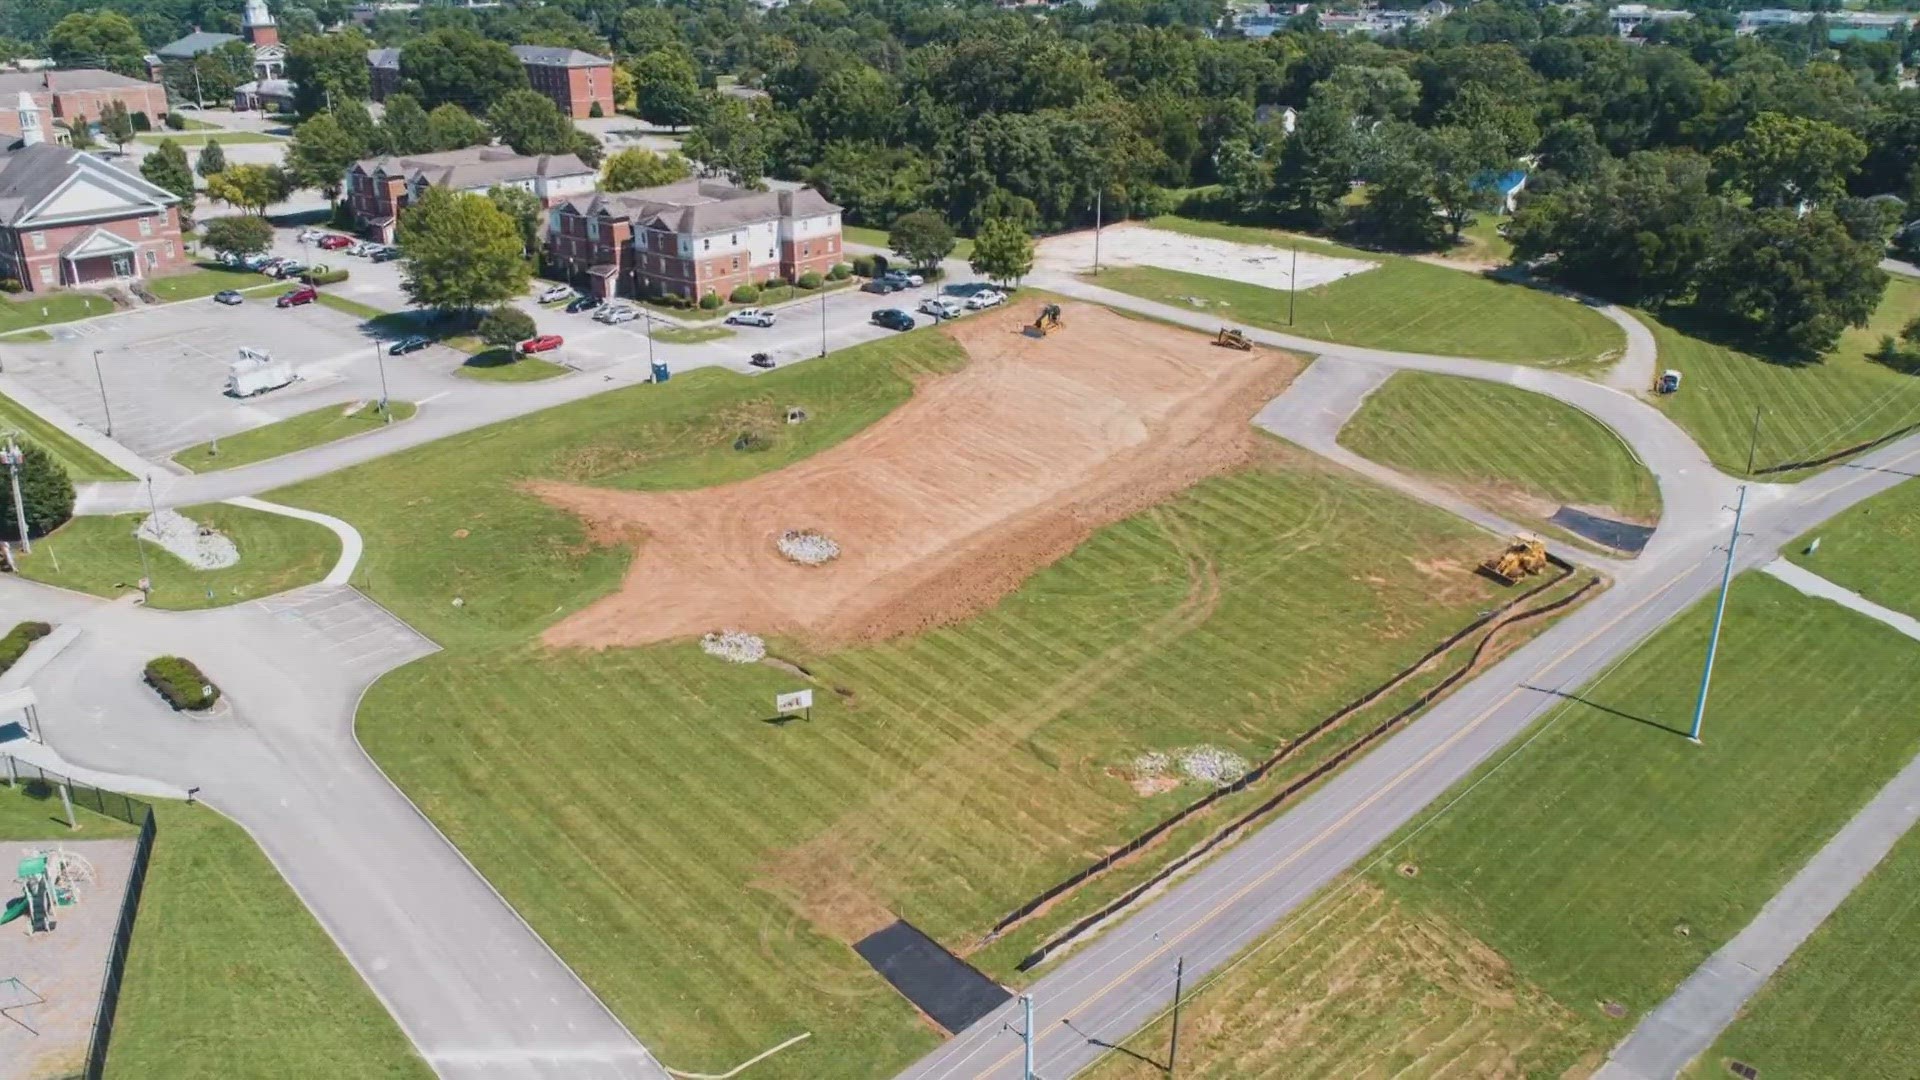 The West Campus Commons is slated to welcome students in the fall of 2024 and is the largest construction project in the university's history.